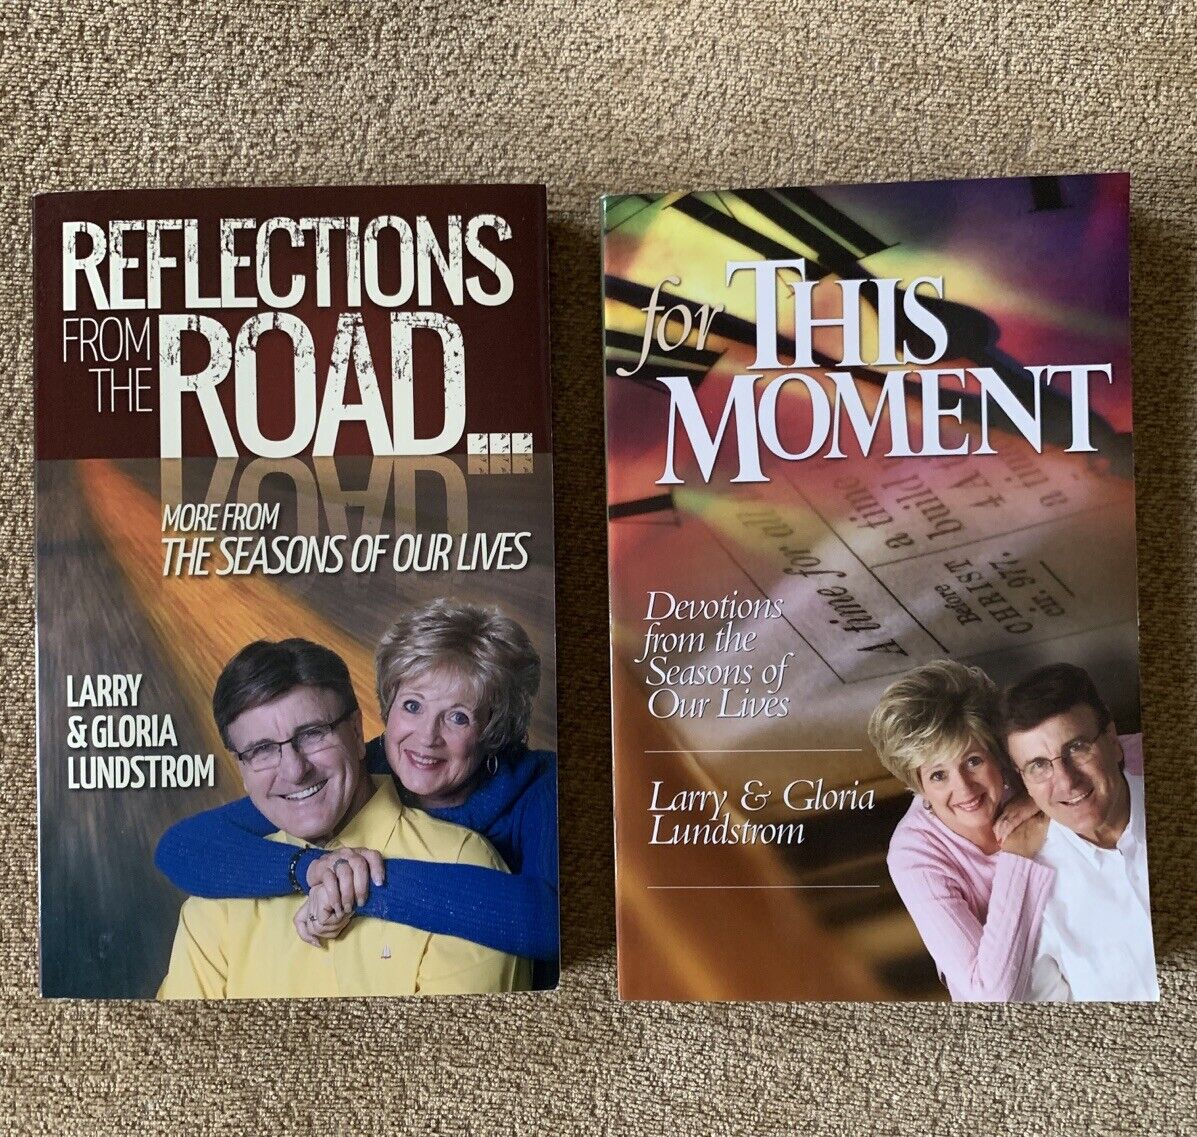 Larry & Gloria Lundstrom Set Of 2 Books Devotions & Reflects From The Road